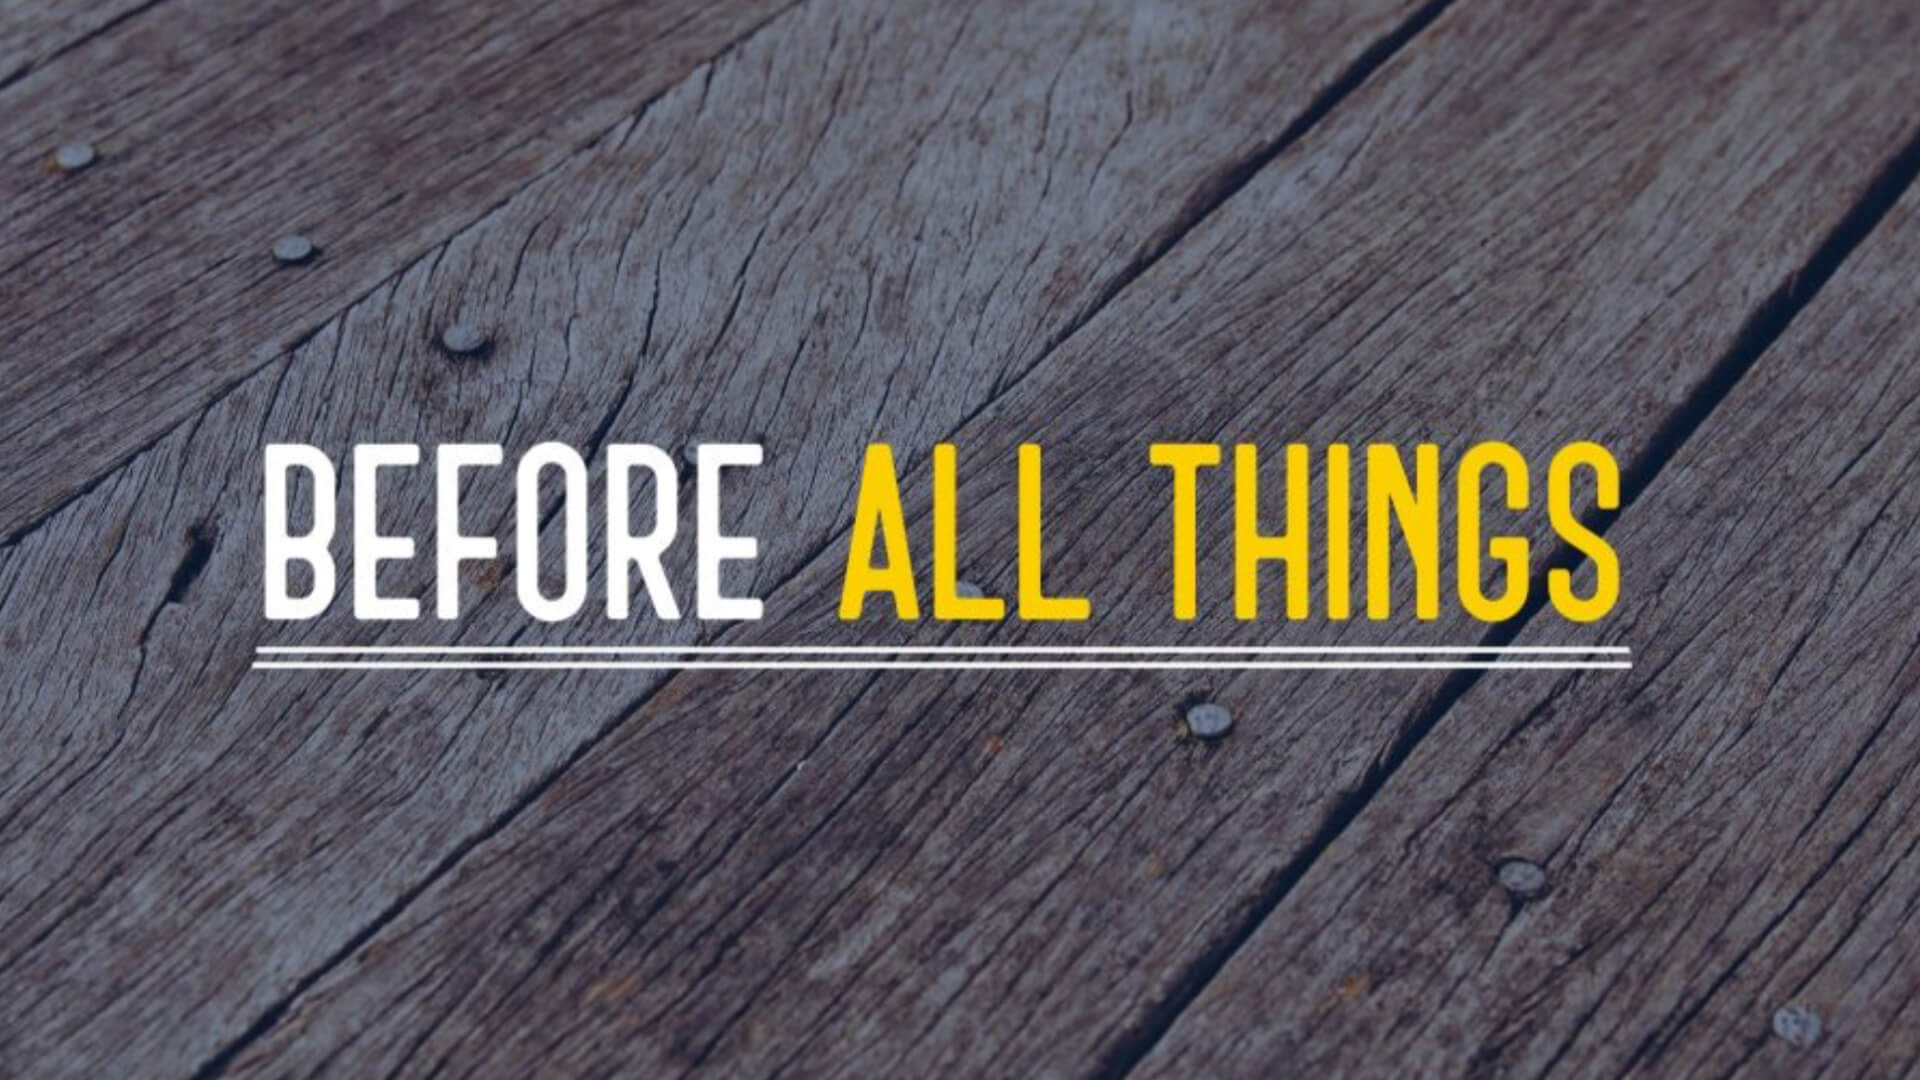 Before All Things